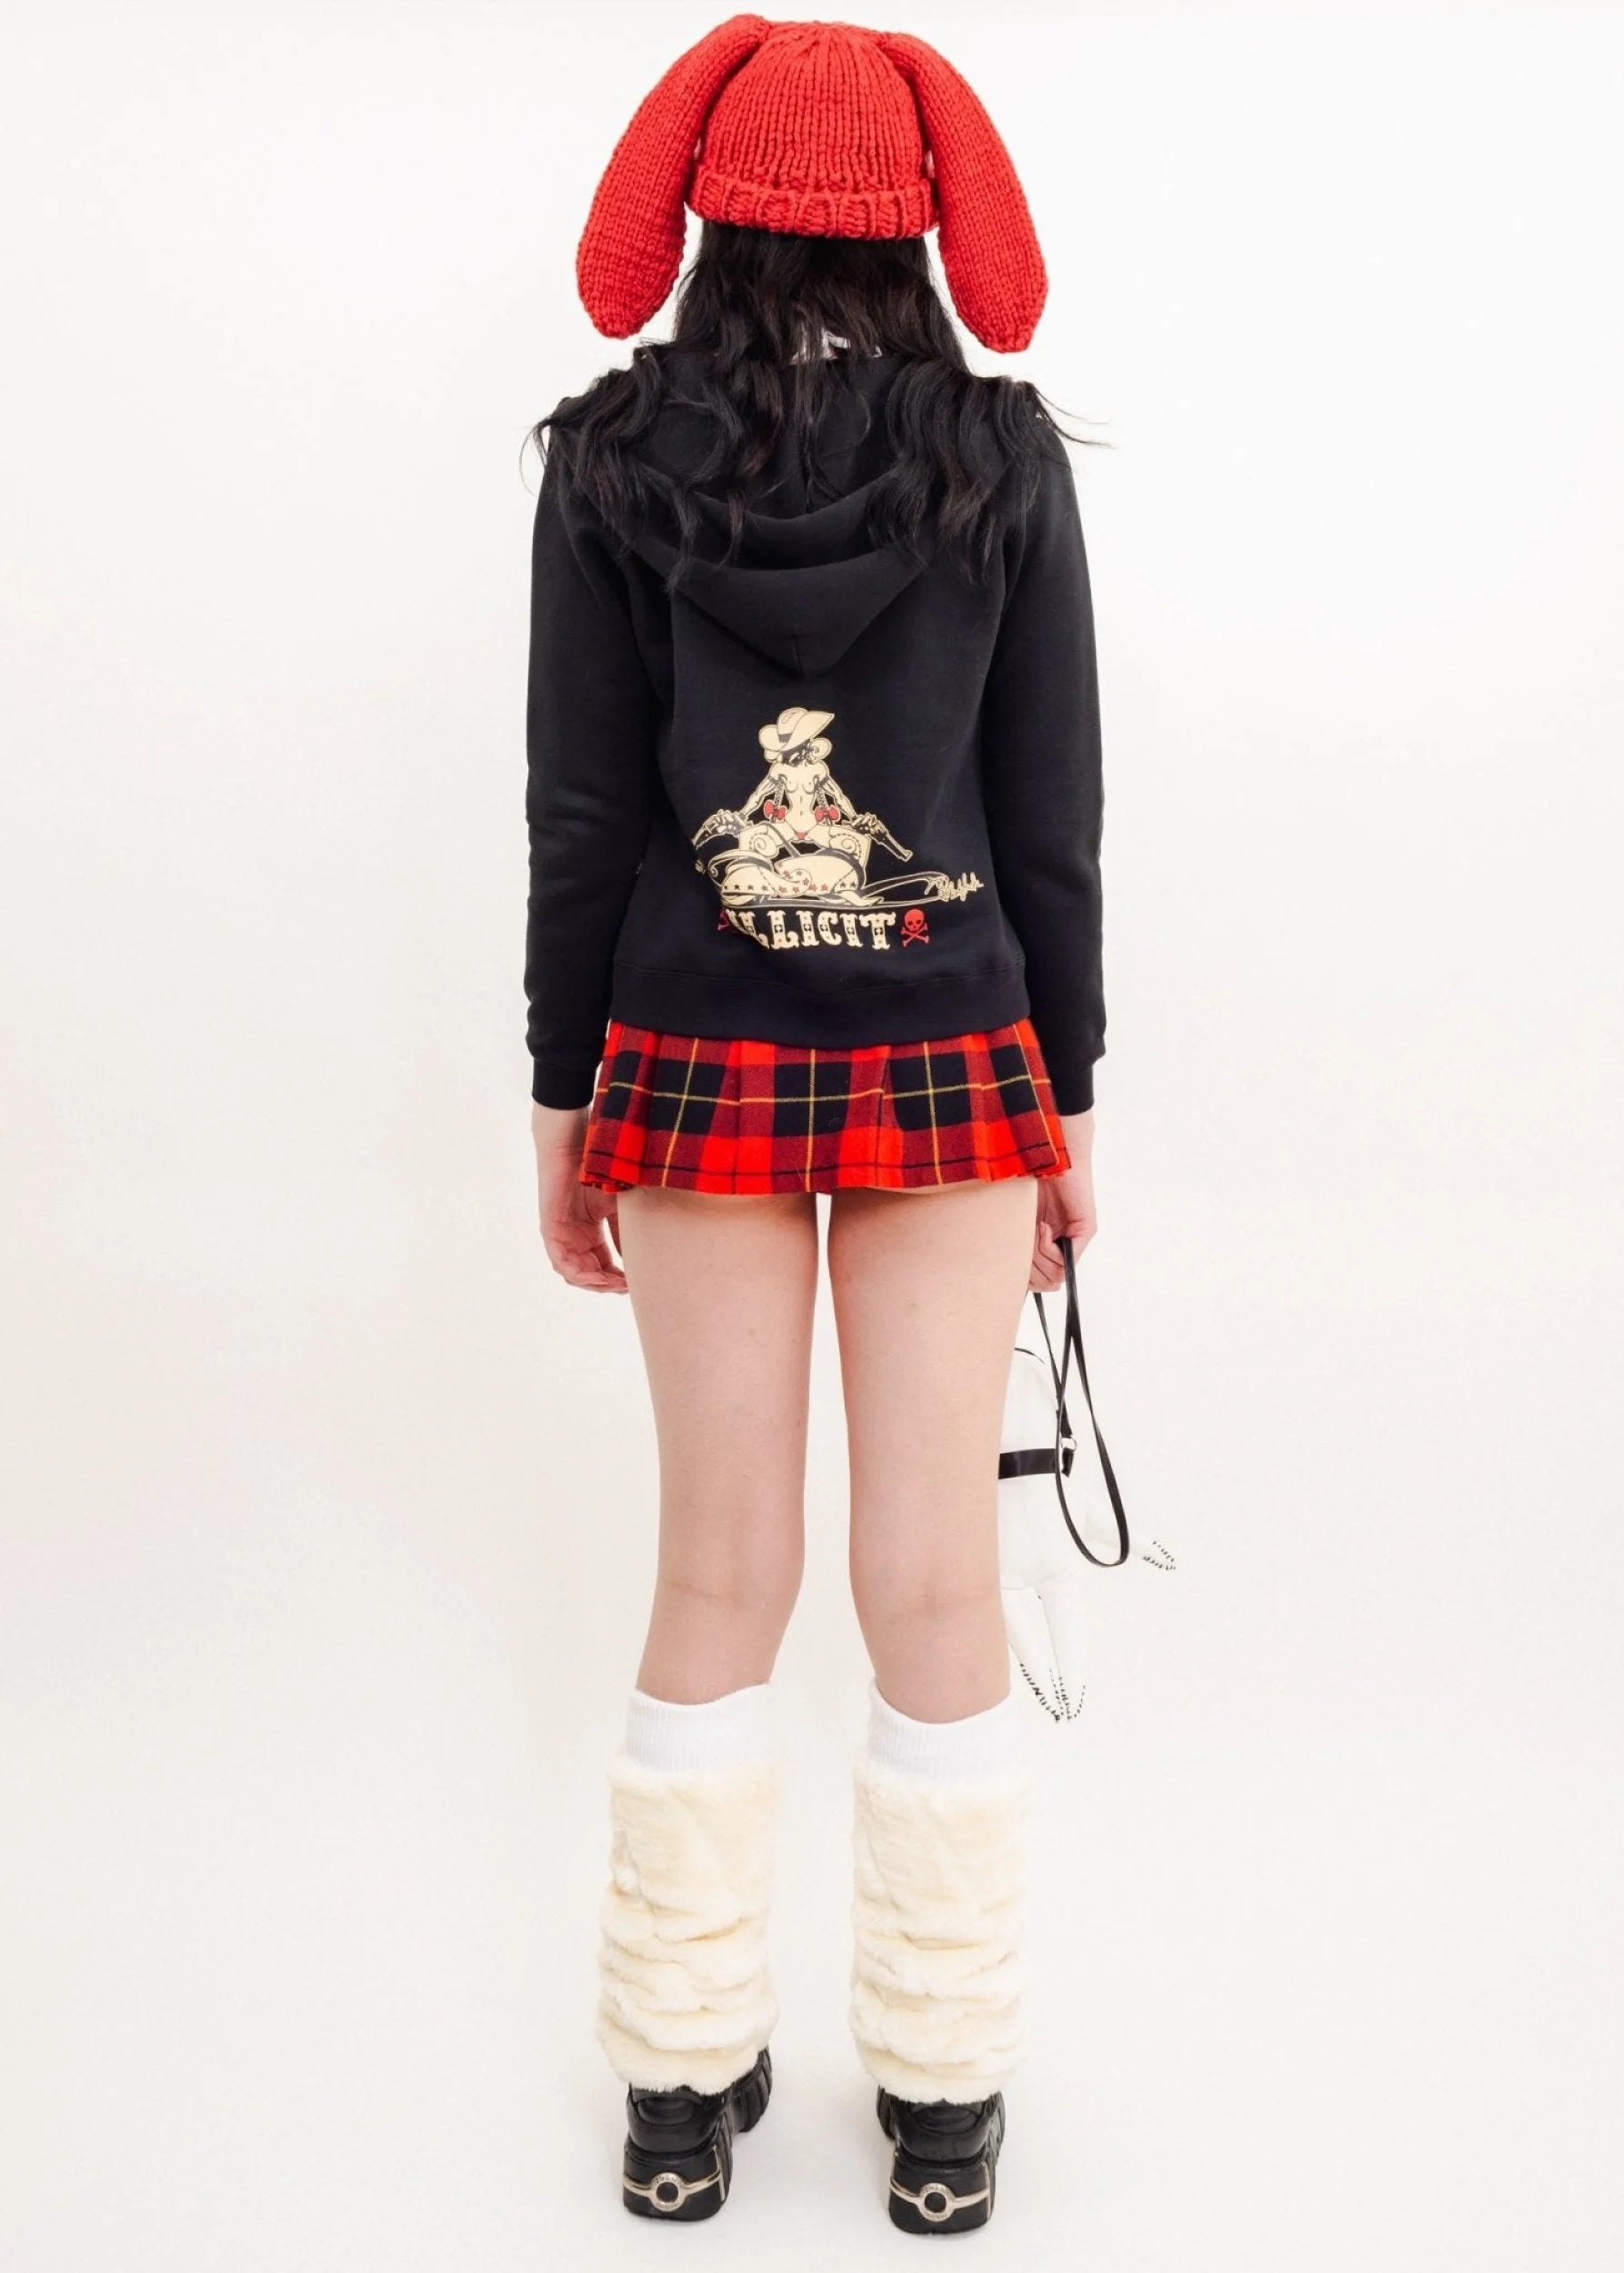 Illicit Thotty Cowgirl print hoodie